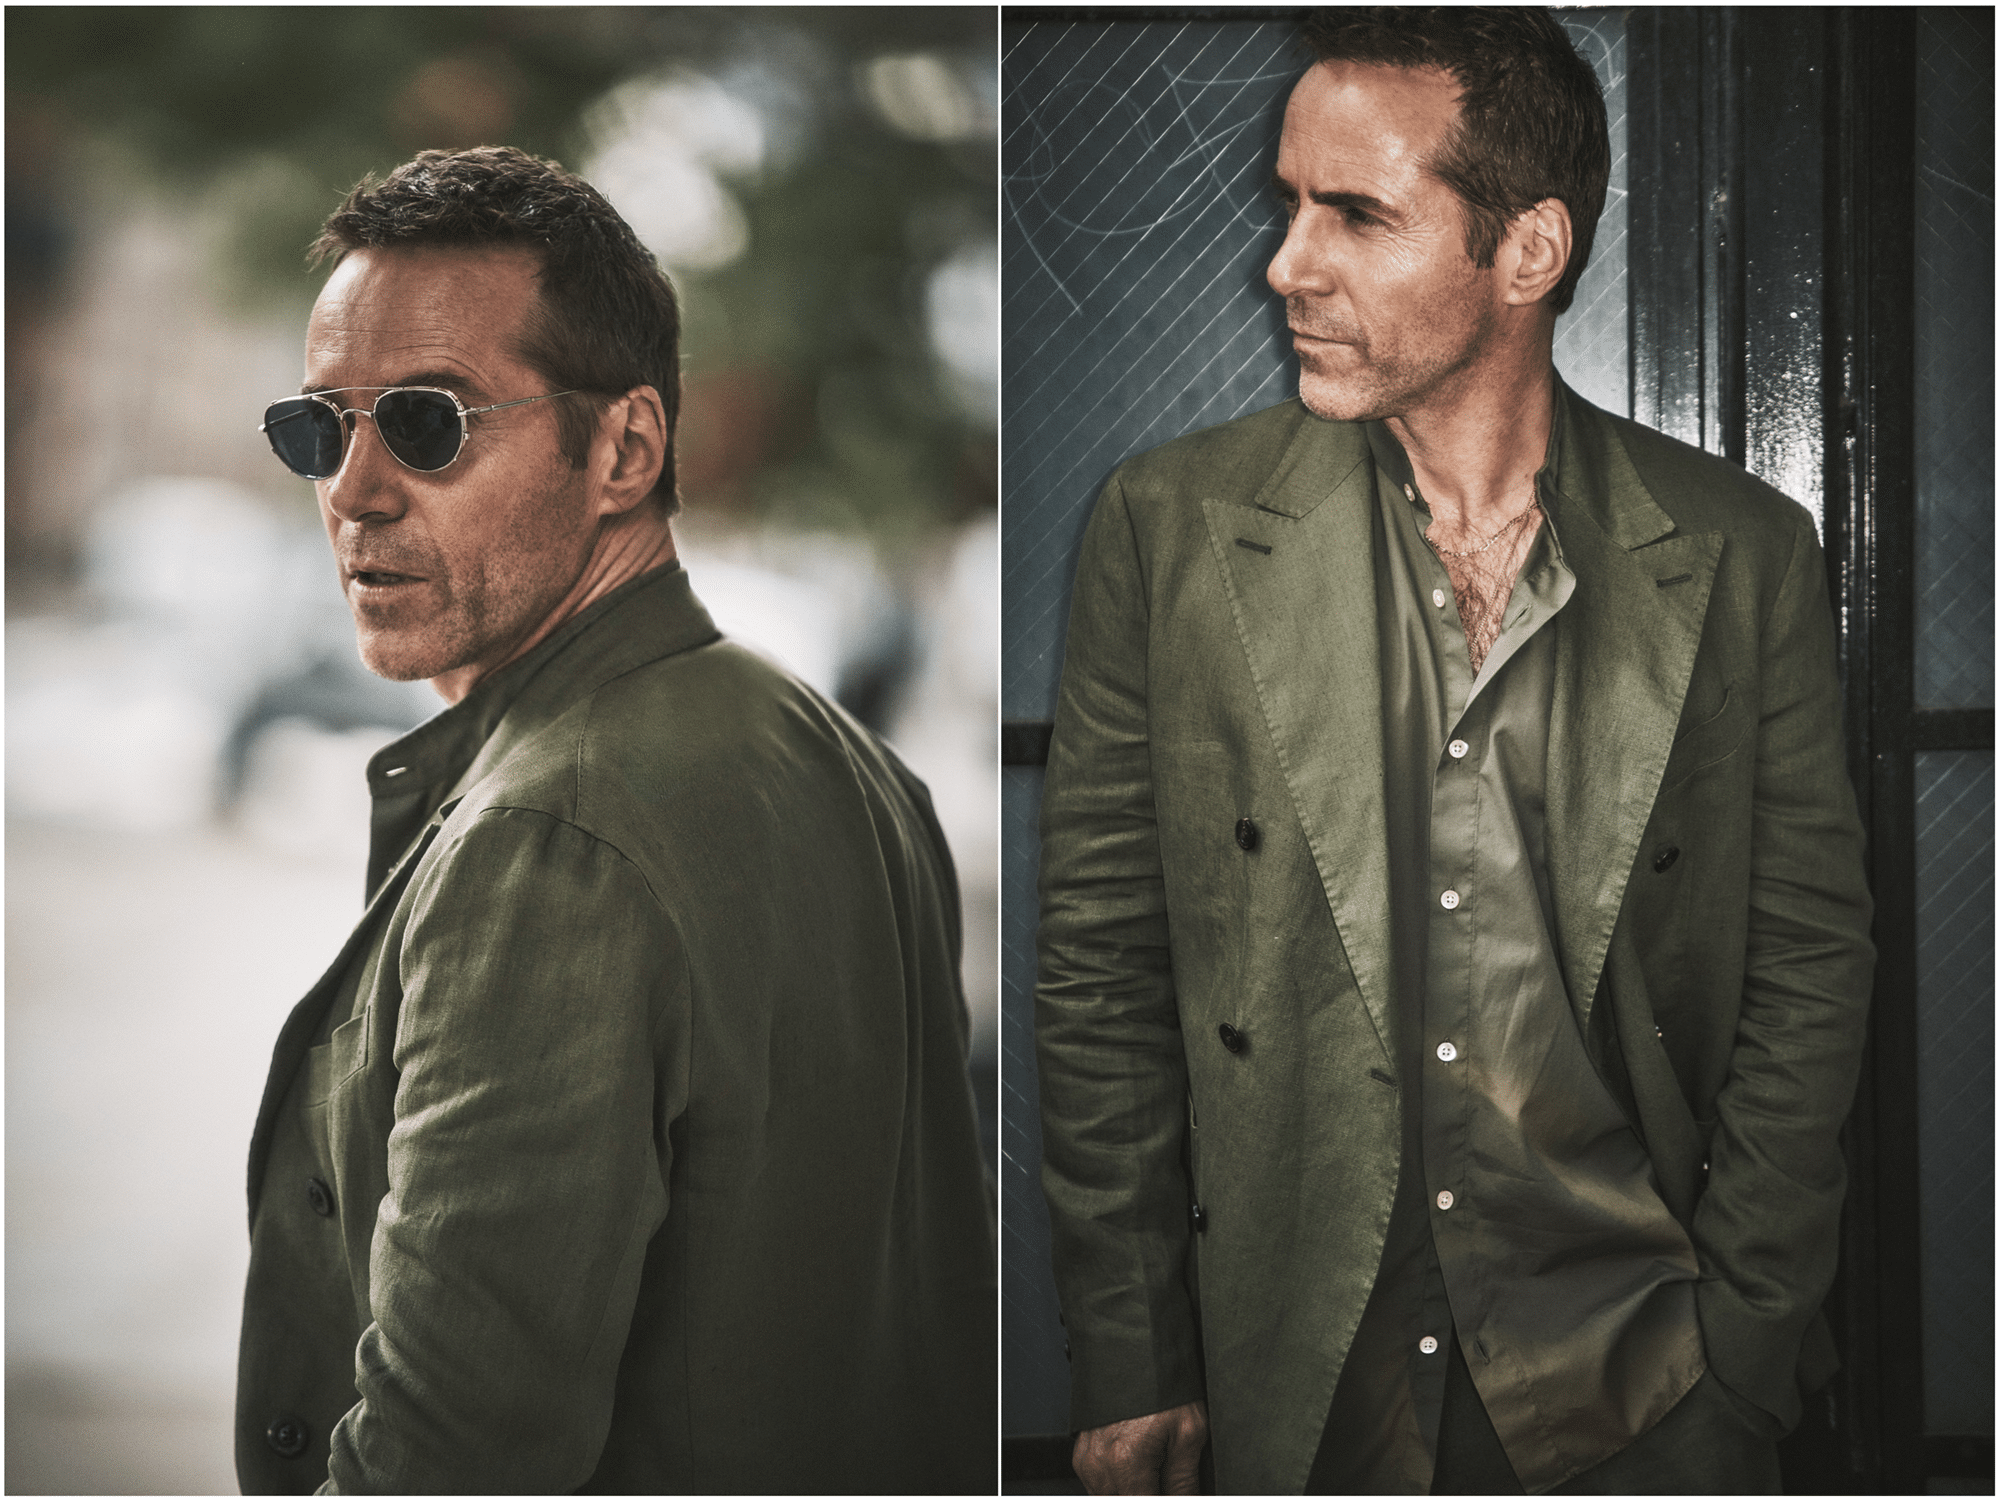 Alessandro is wearing an olive suit and shirt by BOGLIOLI; sunglasses byJACQUES MARIE MAGE.